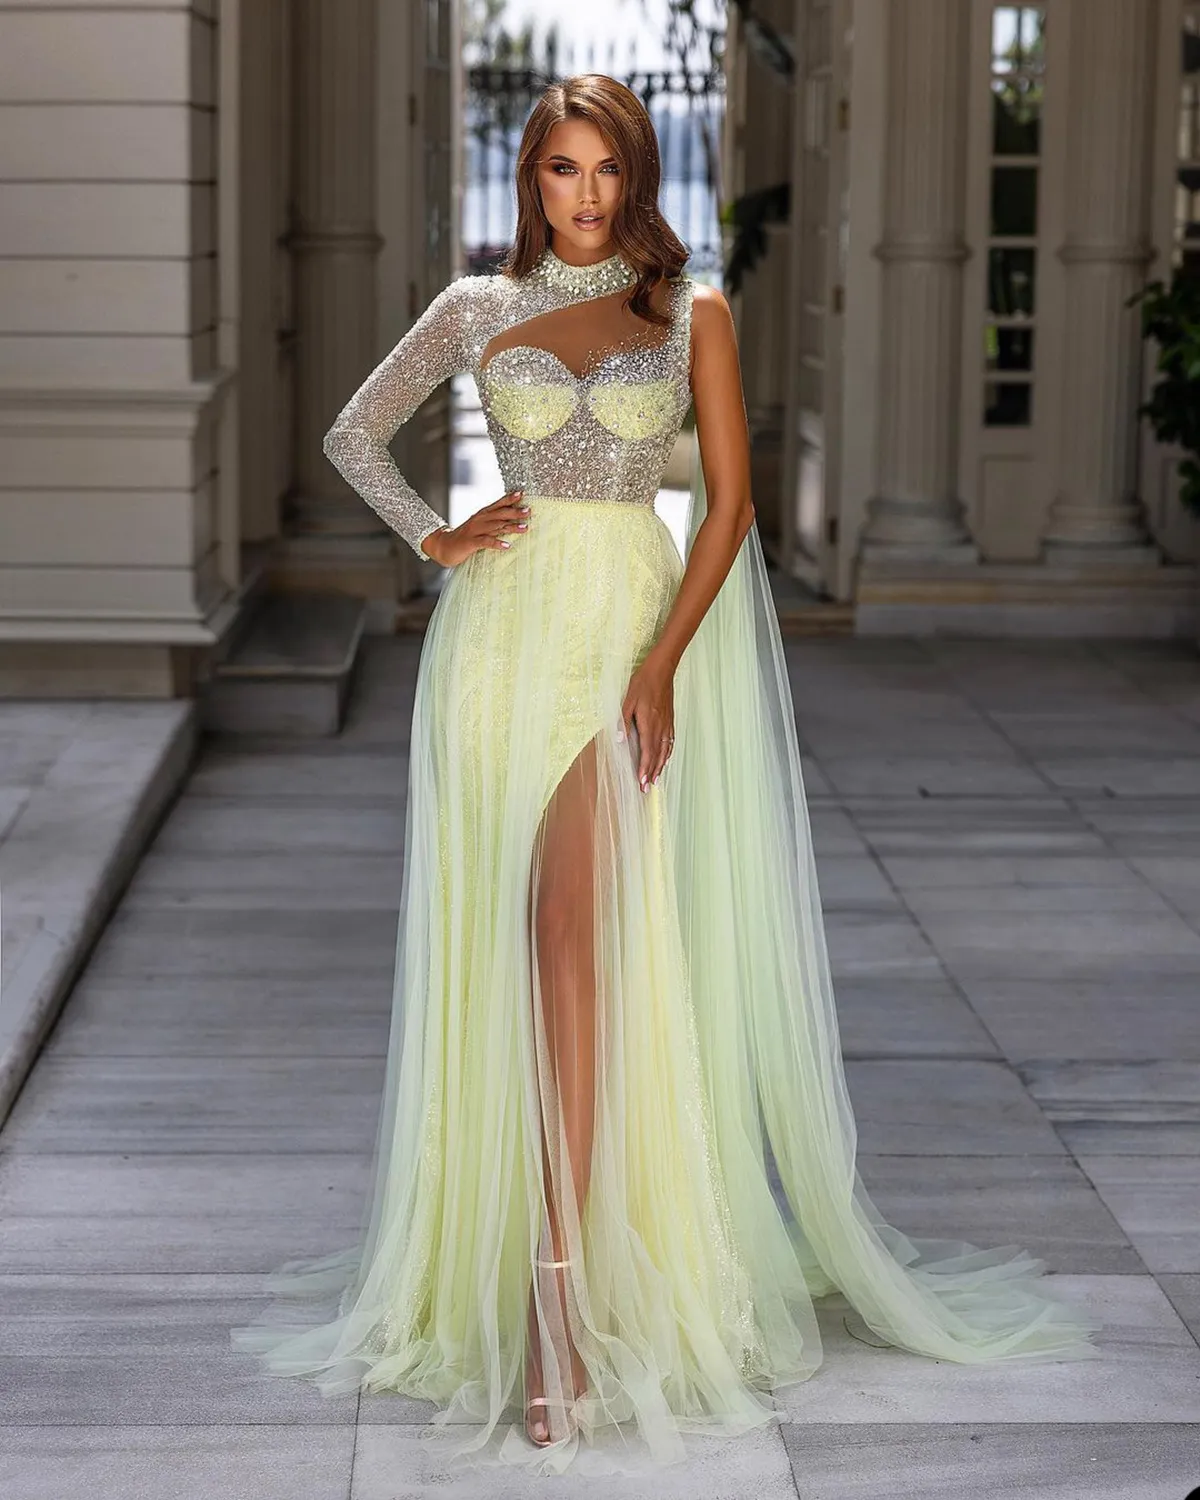 Saudi Arabic Mermaid Evening Dress Light Yellow Sequins High Neck Prom Gowns Custom Made Long Sleeve Special Occasion Dresses